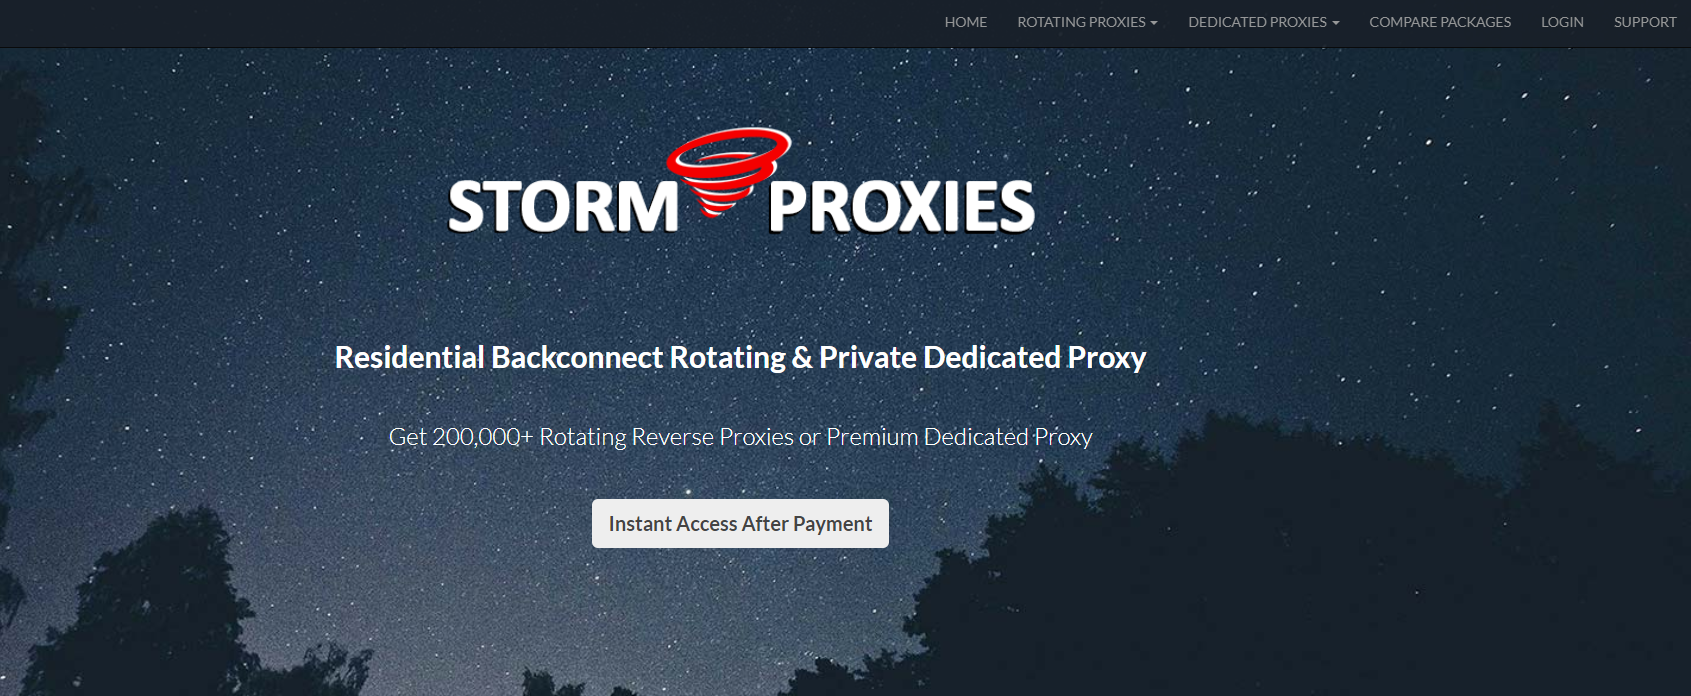 Storm Proxies Overview - Best Residential Proxy Providers